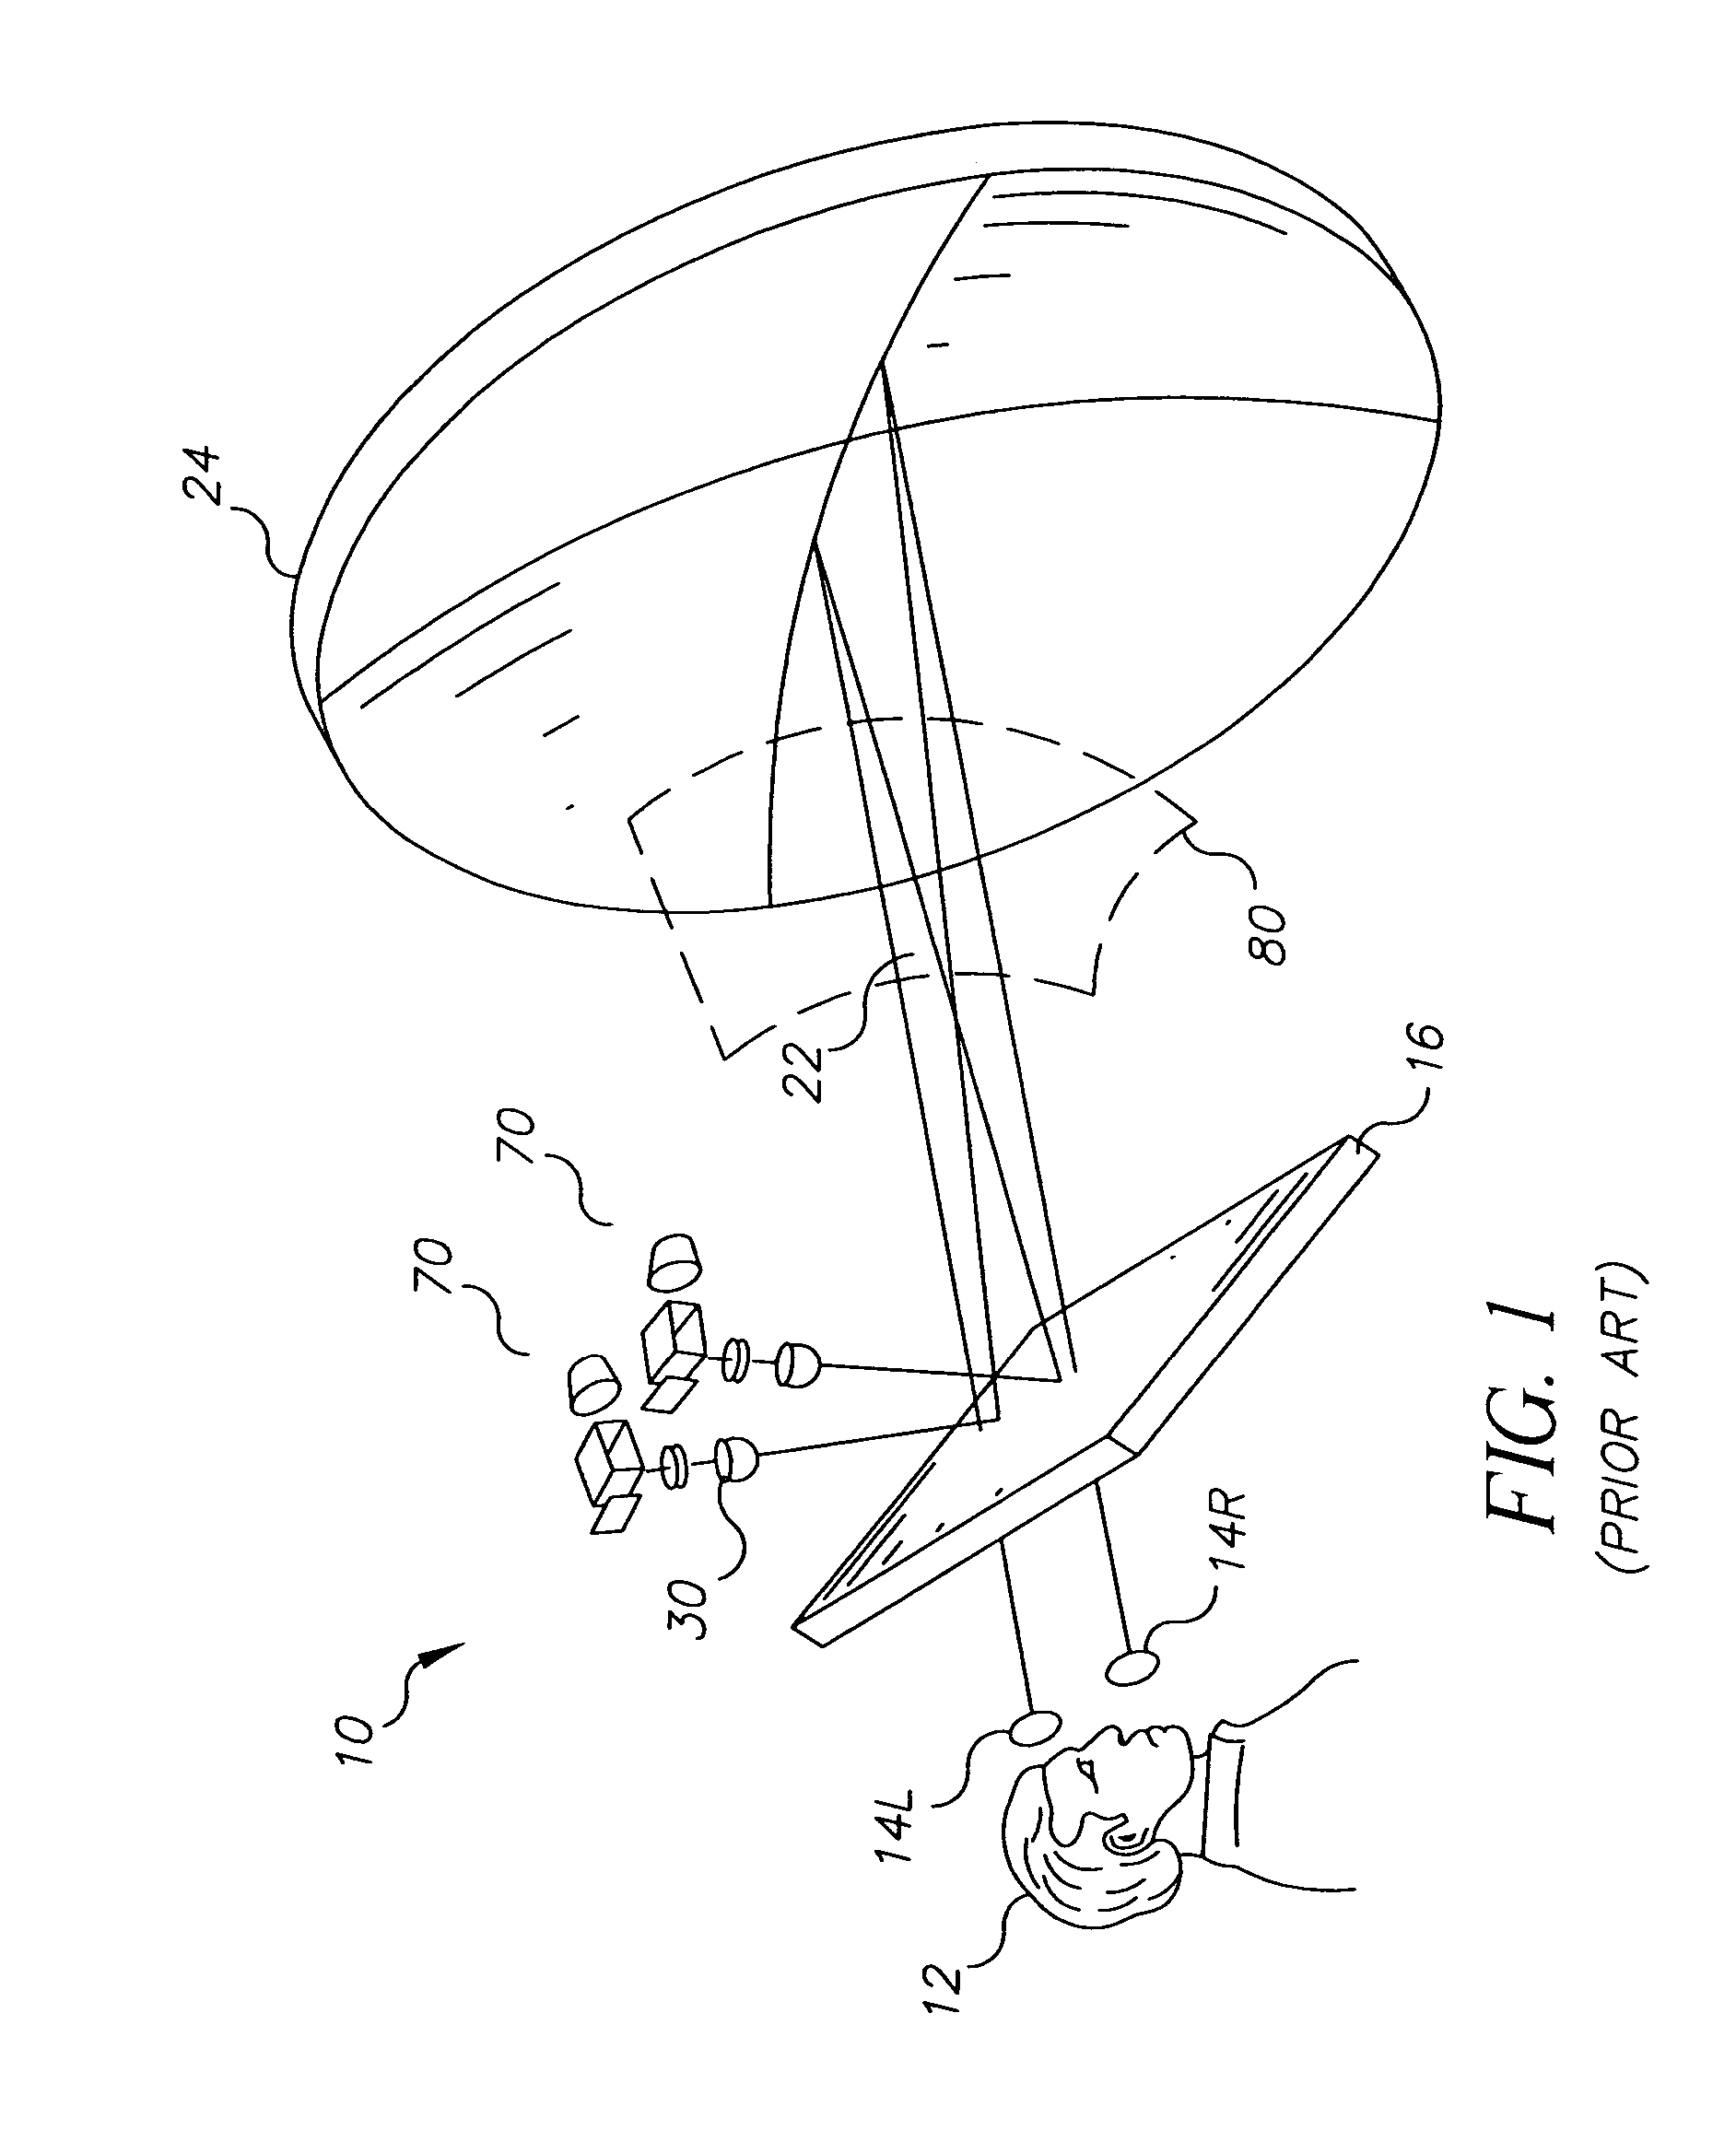 Method for providing a curved image